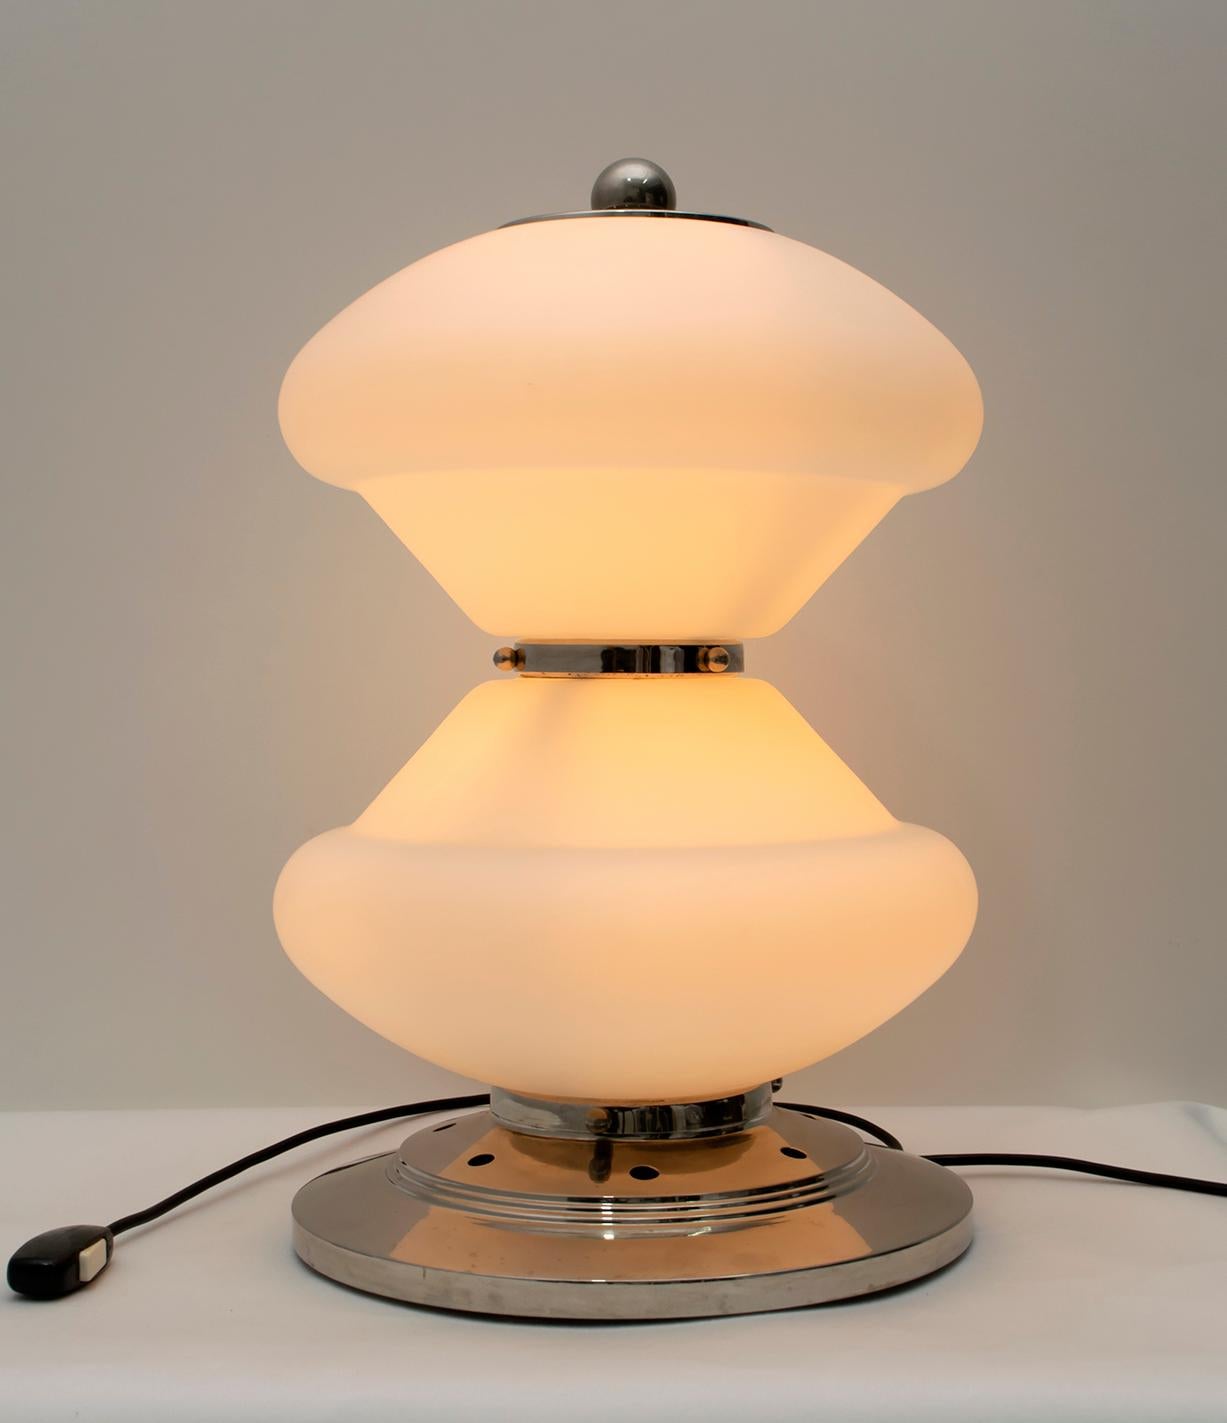 Mazzega Mid-Century Modern Chrome and Murano Opaline Glass Table Lamp, 1960s For Sale 4